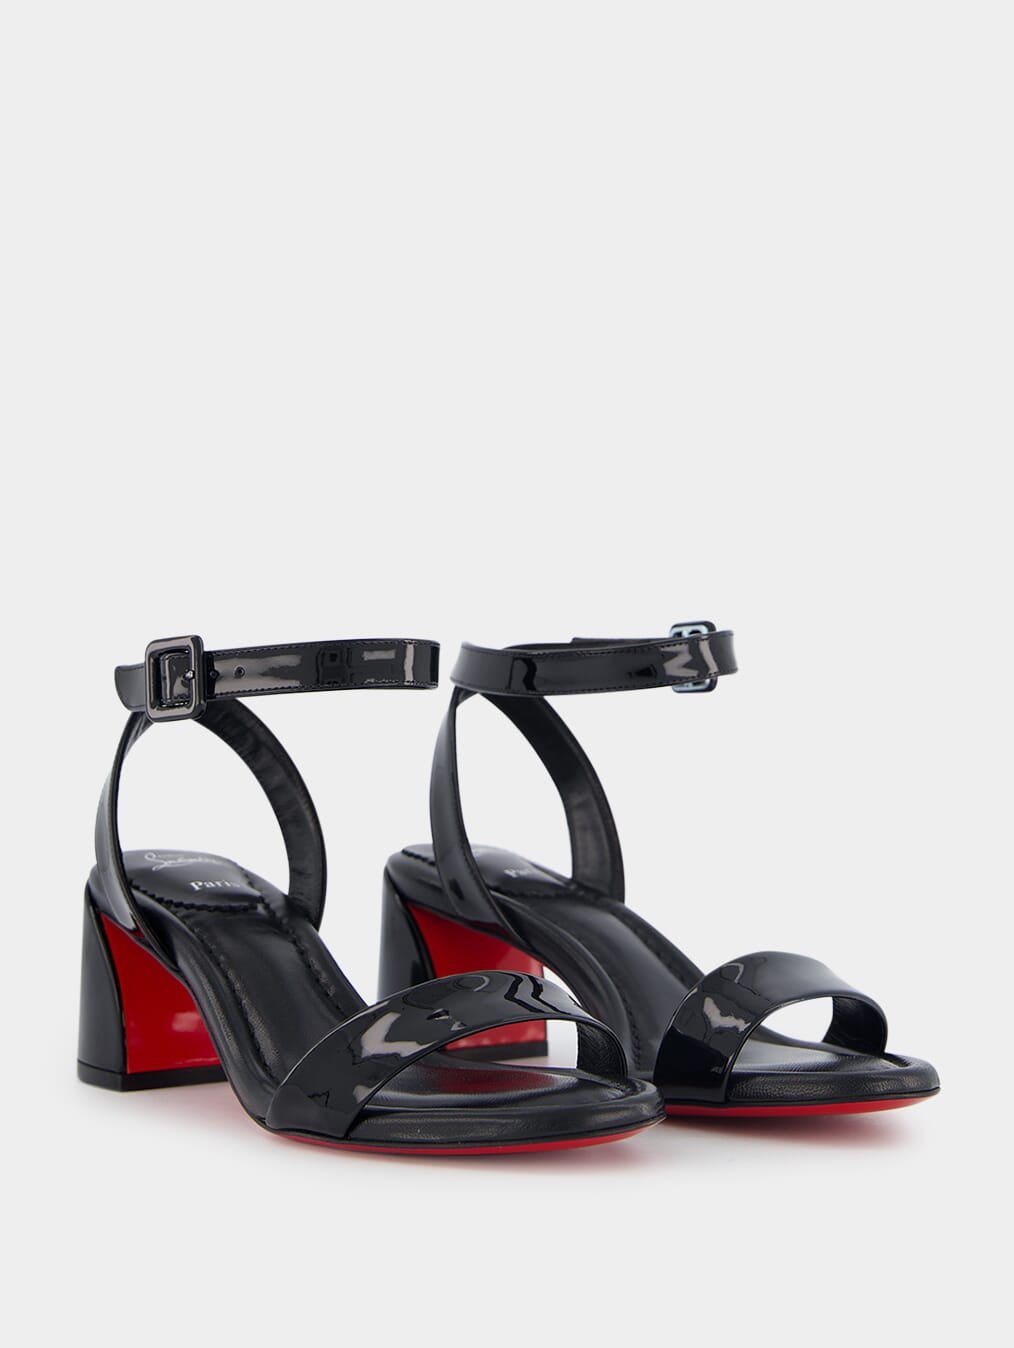 Christian LouboutinMiss Sabina 55 Patent-Leather Sandals at Fashion Clinic